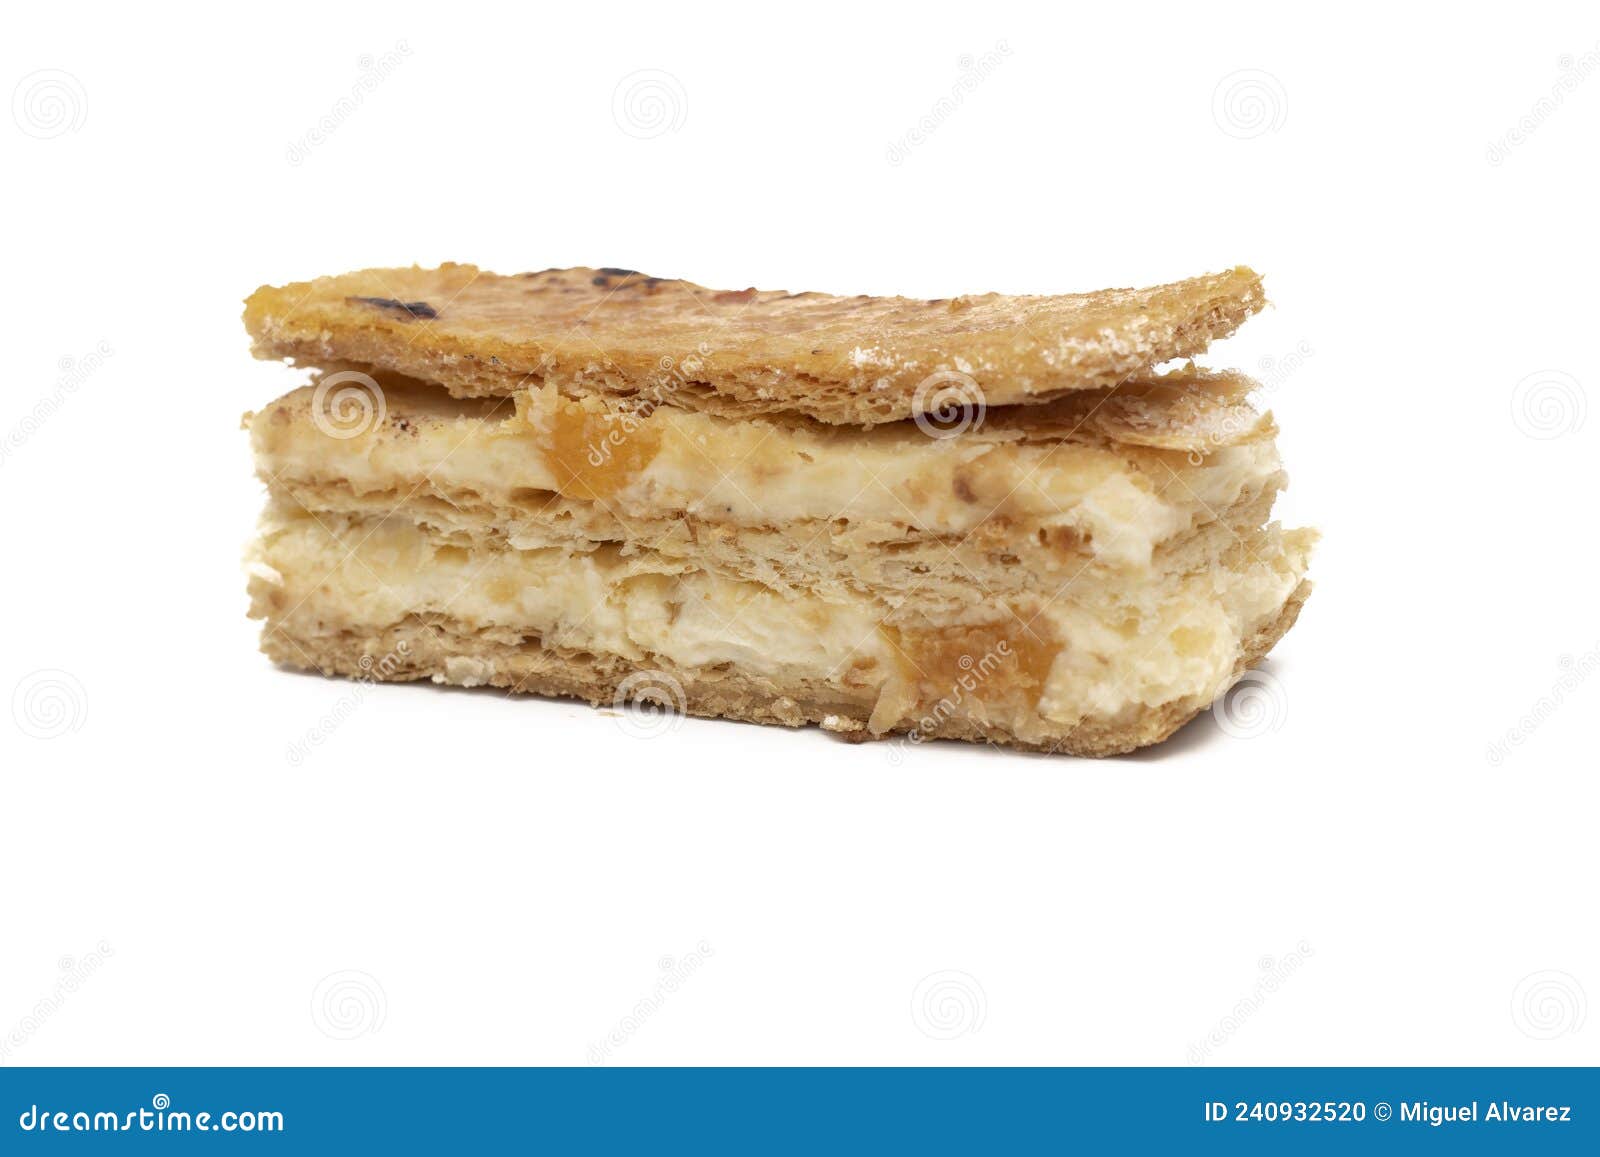 a delicious millefeuille piece of fruit